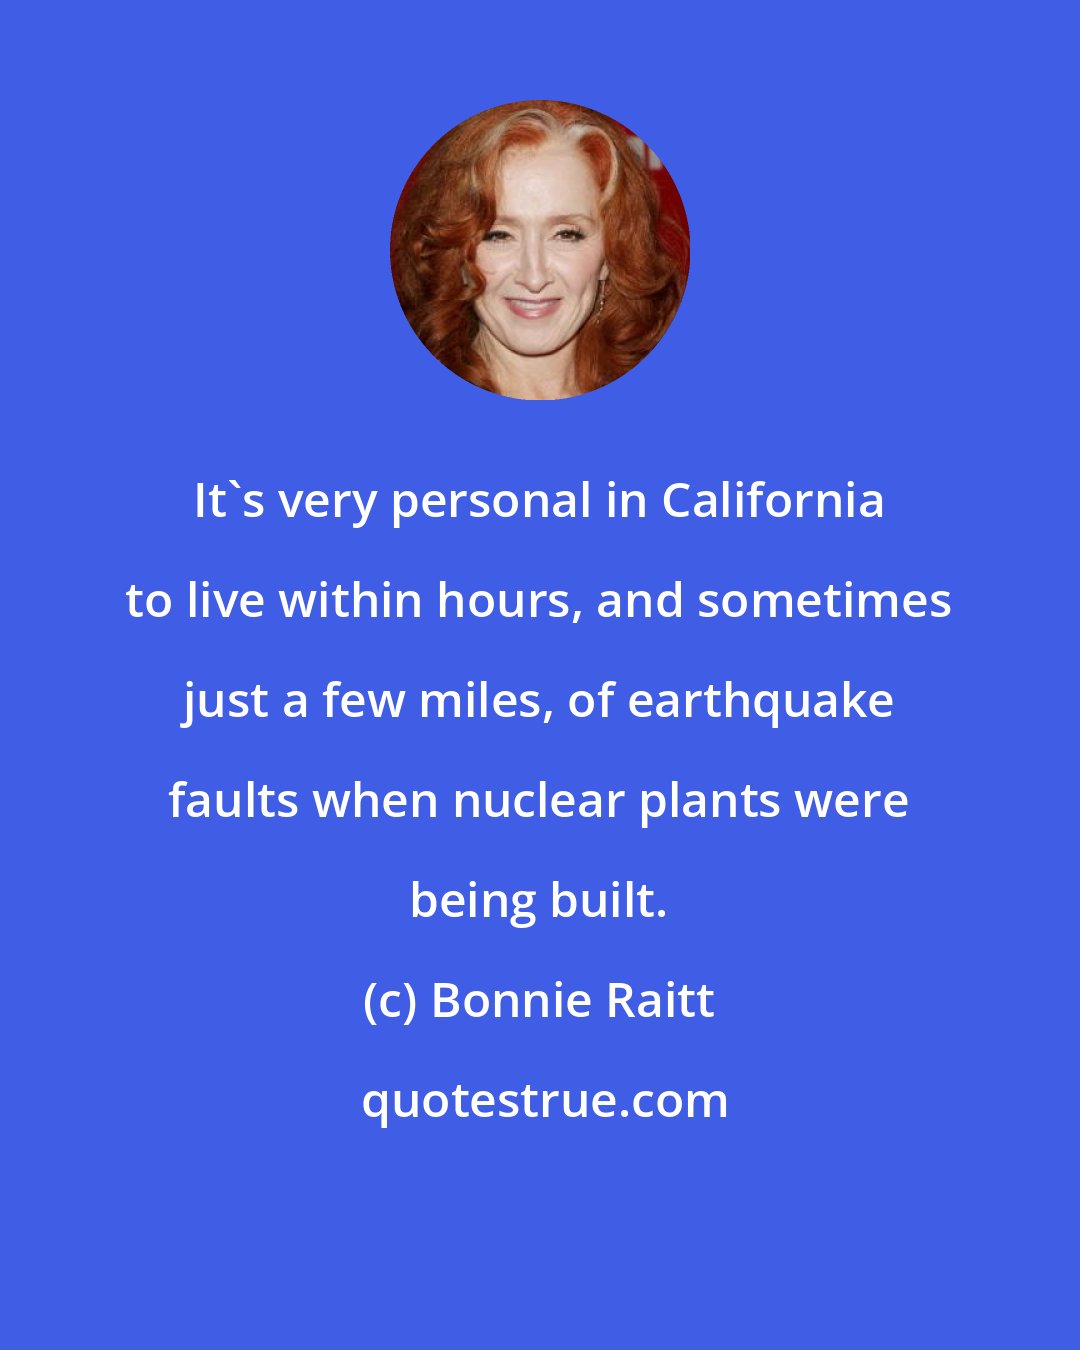 Bonnie Raitt: It's very personal in California to live within hours, and sometimes just a few miles, of earthquake faults when nuclear plants were being built.